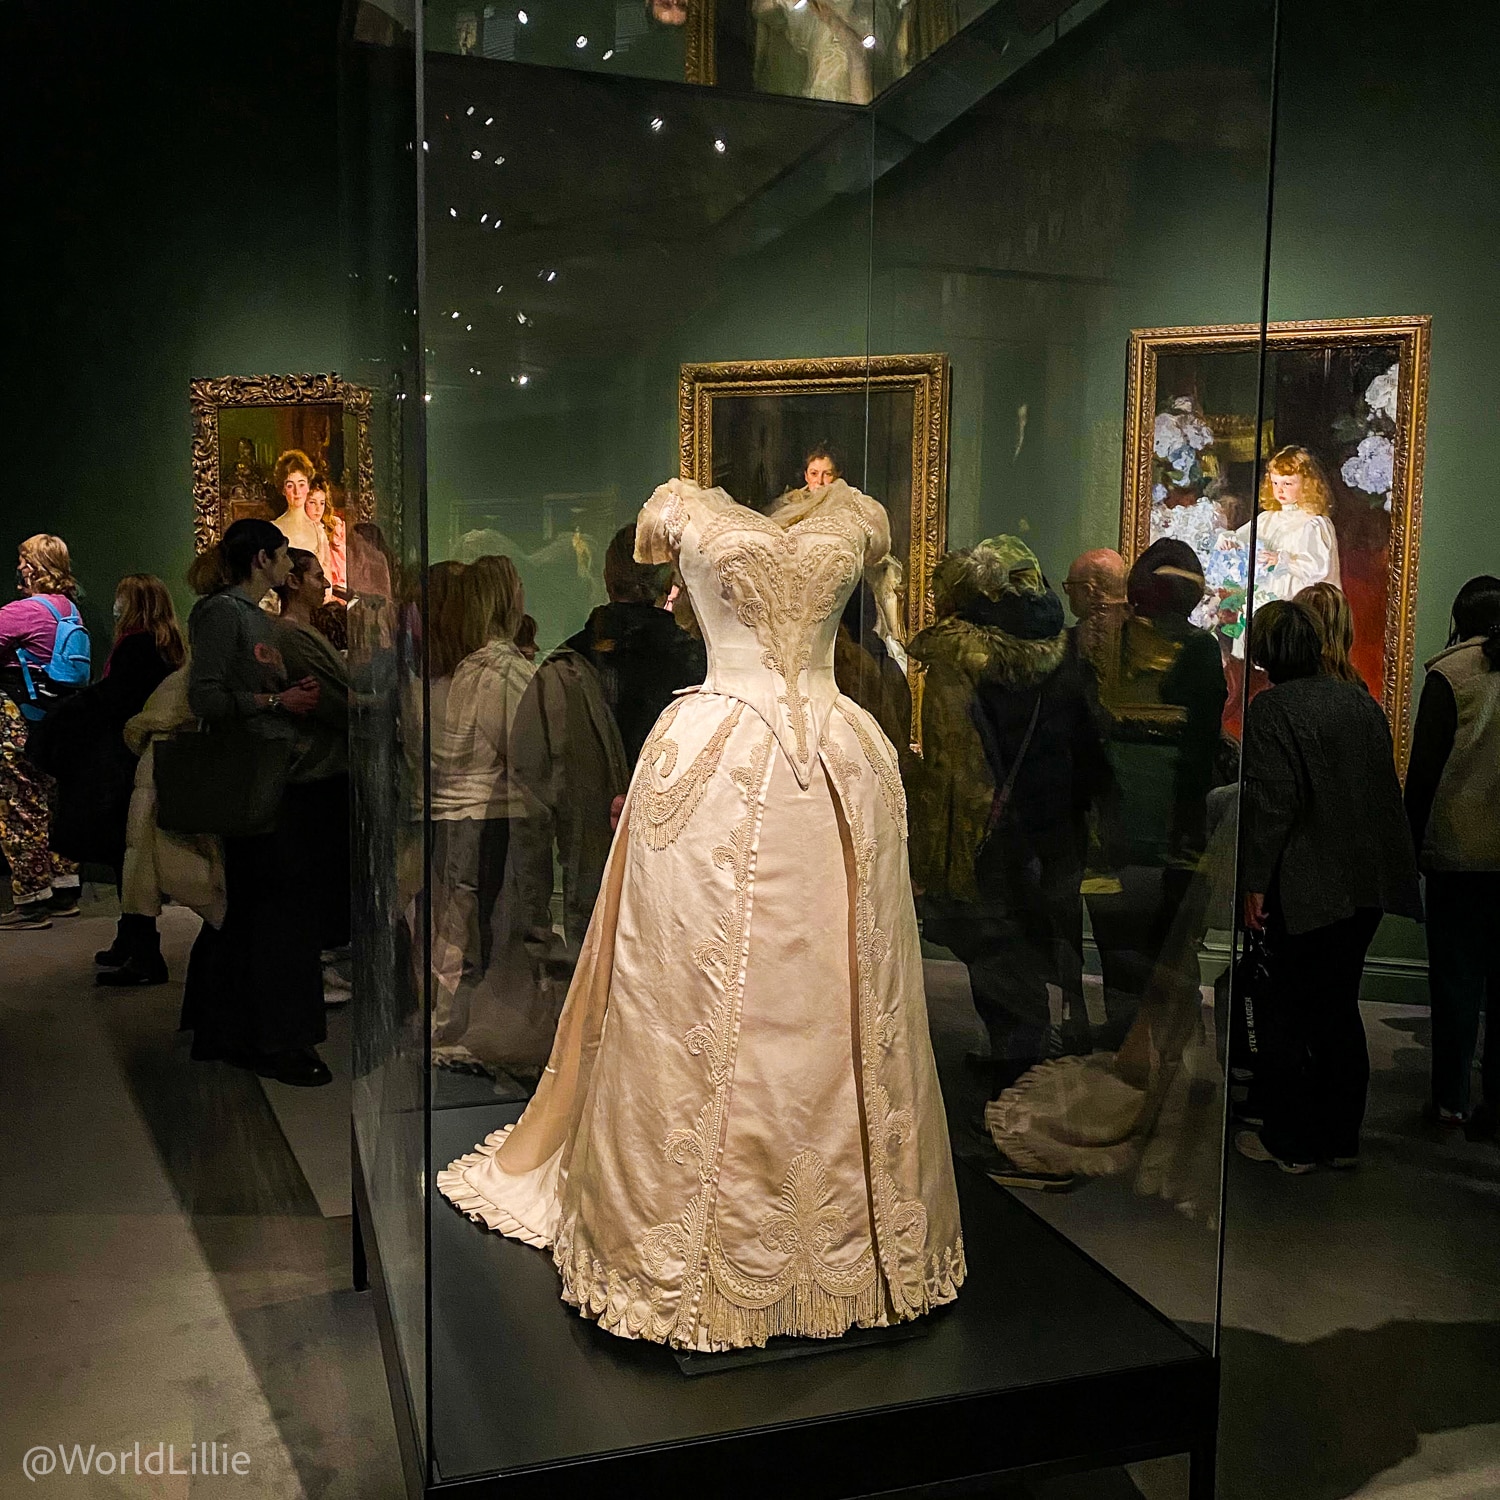 One of the dresses featured by Sargent.